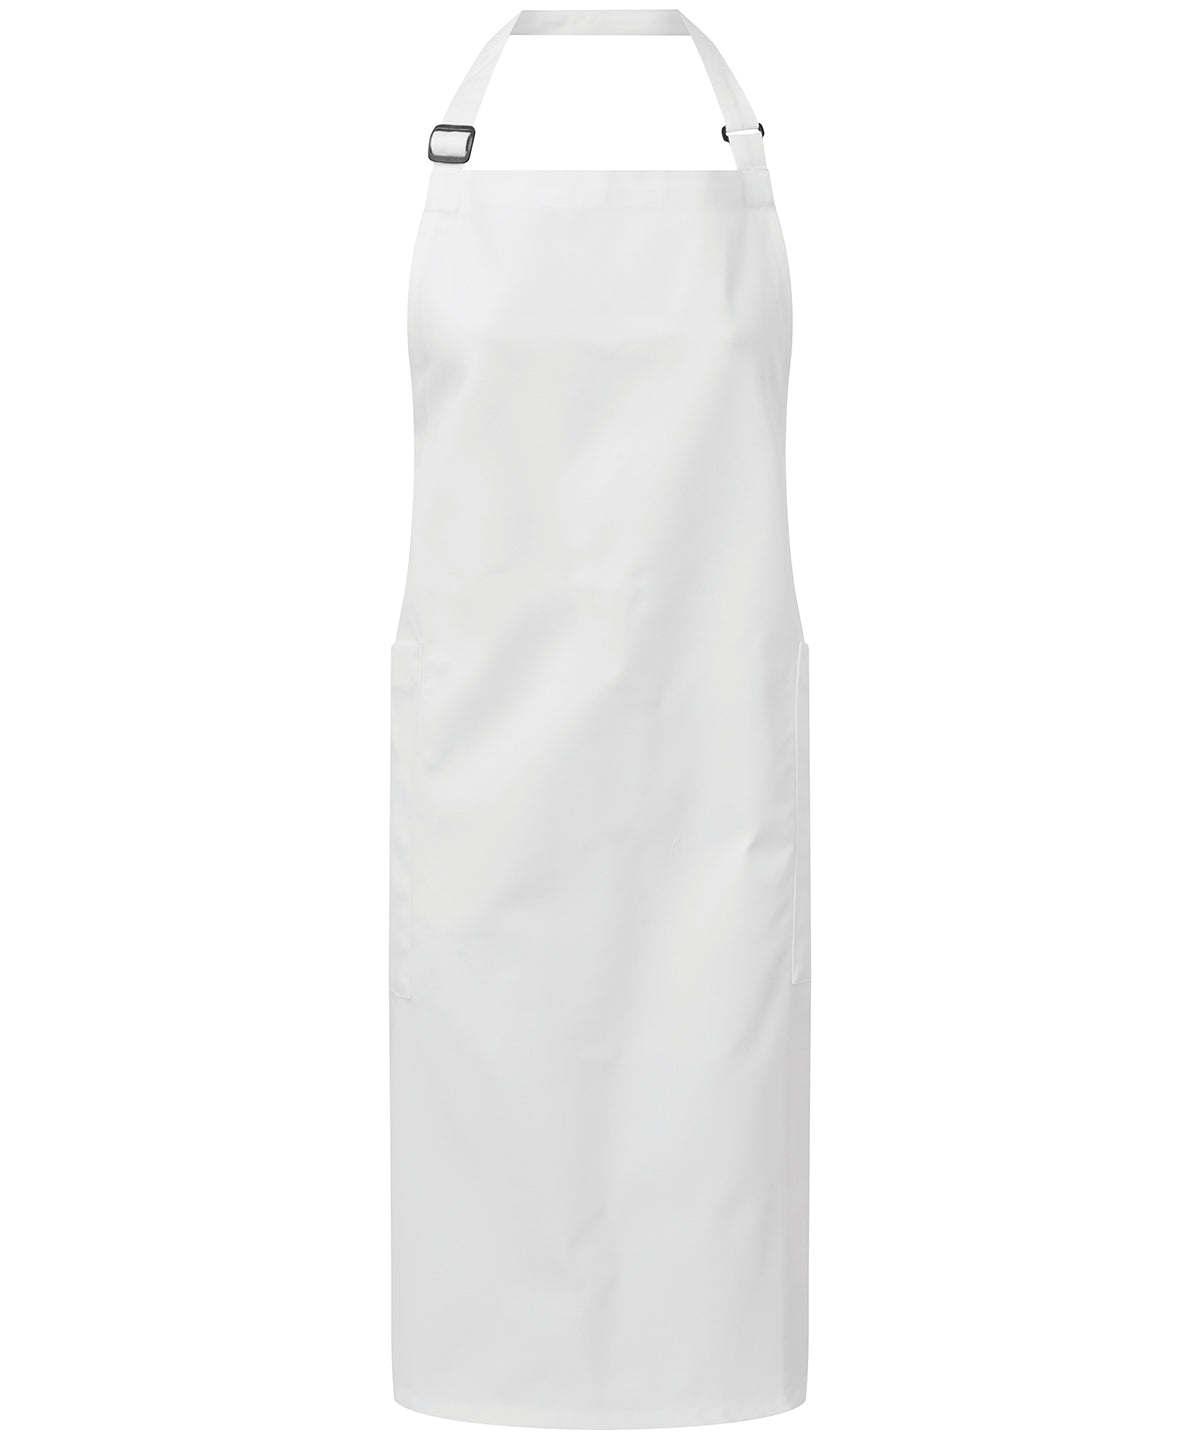 Svuntur - Recycled Polyester & Organic Cotton Apron